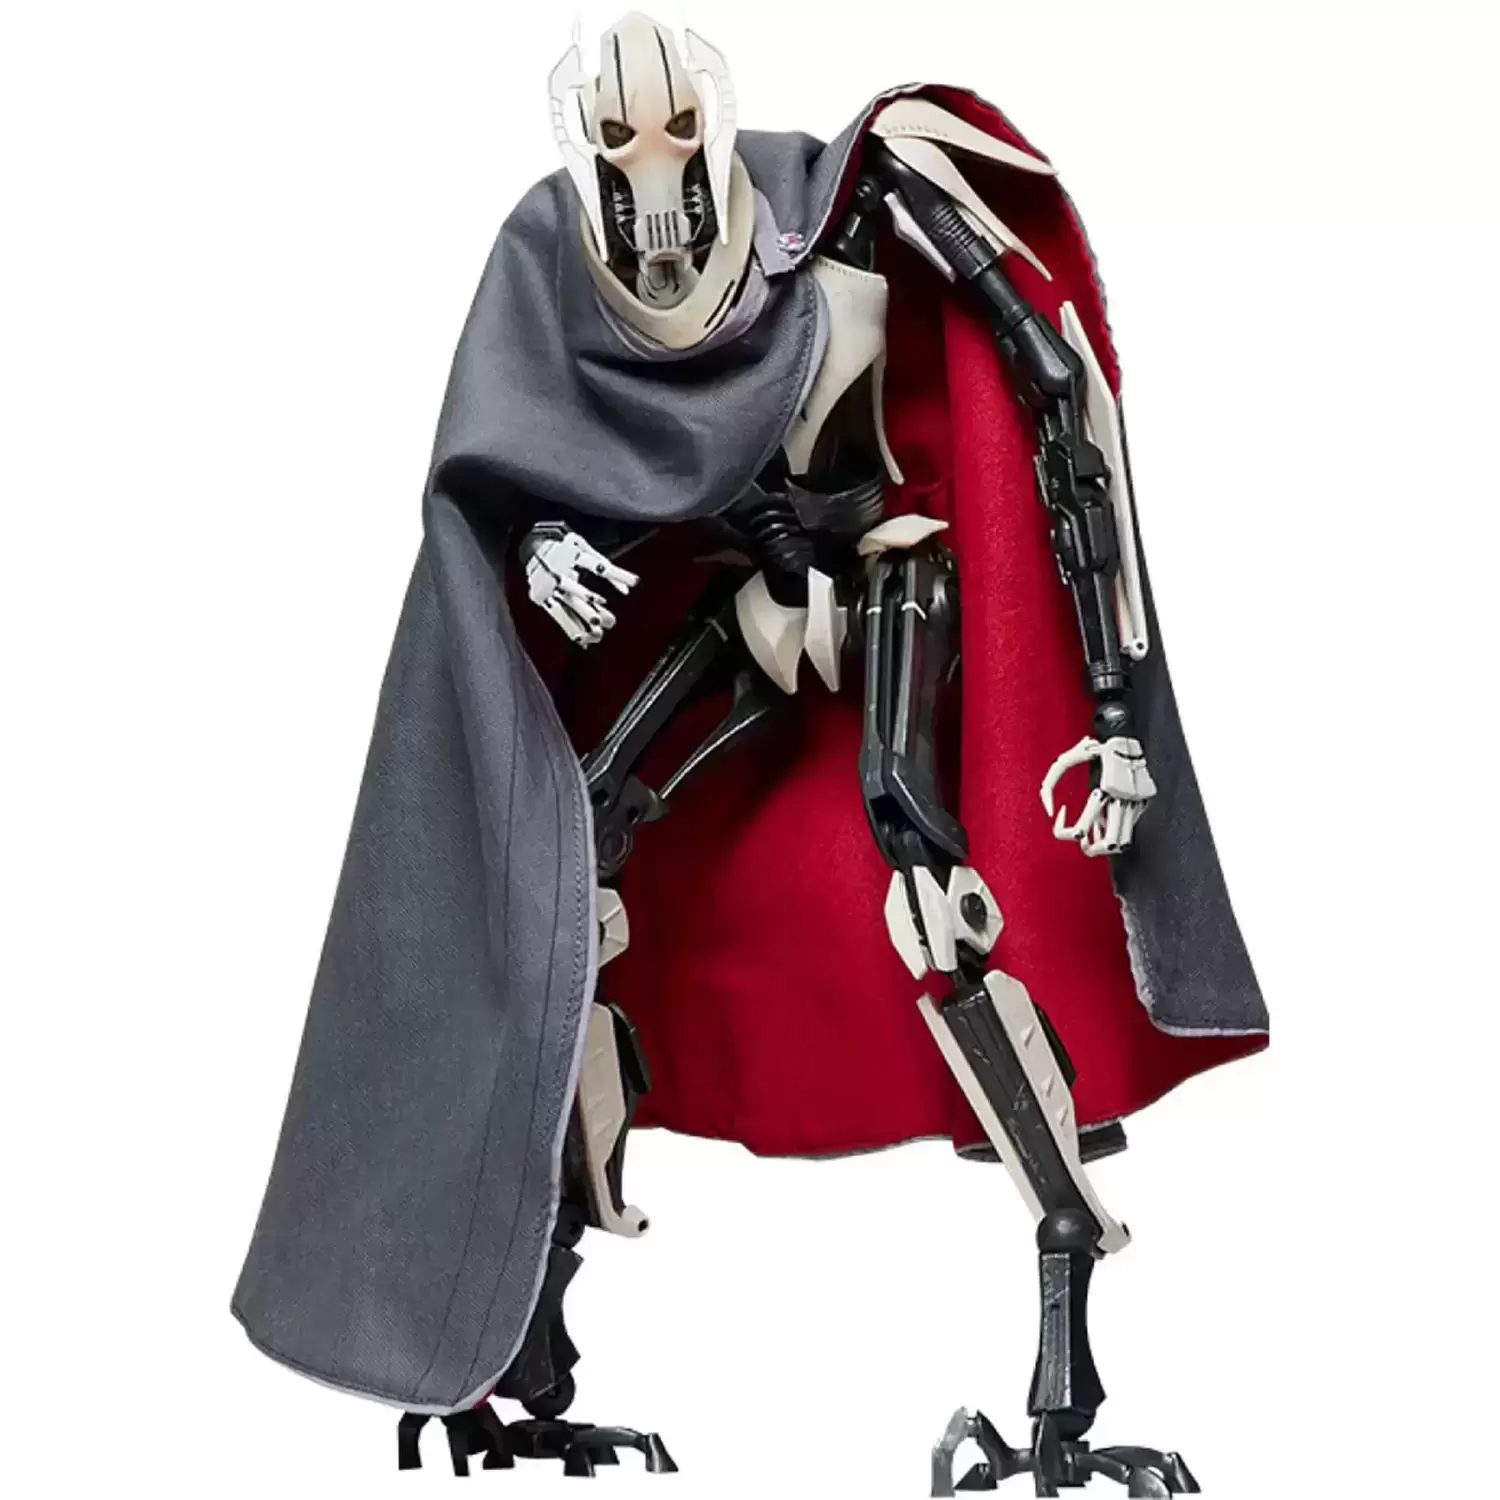 Sideshow - Star Wars - General Grievous Sixth Scale